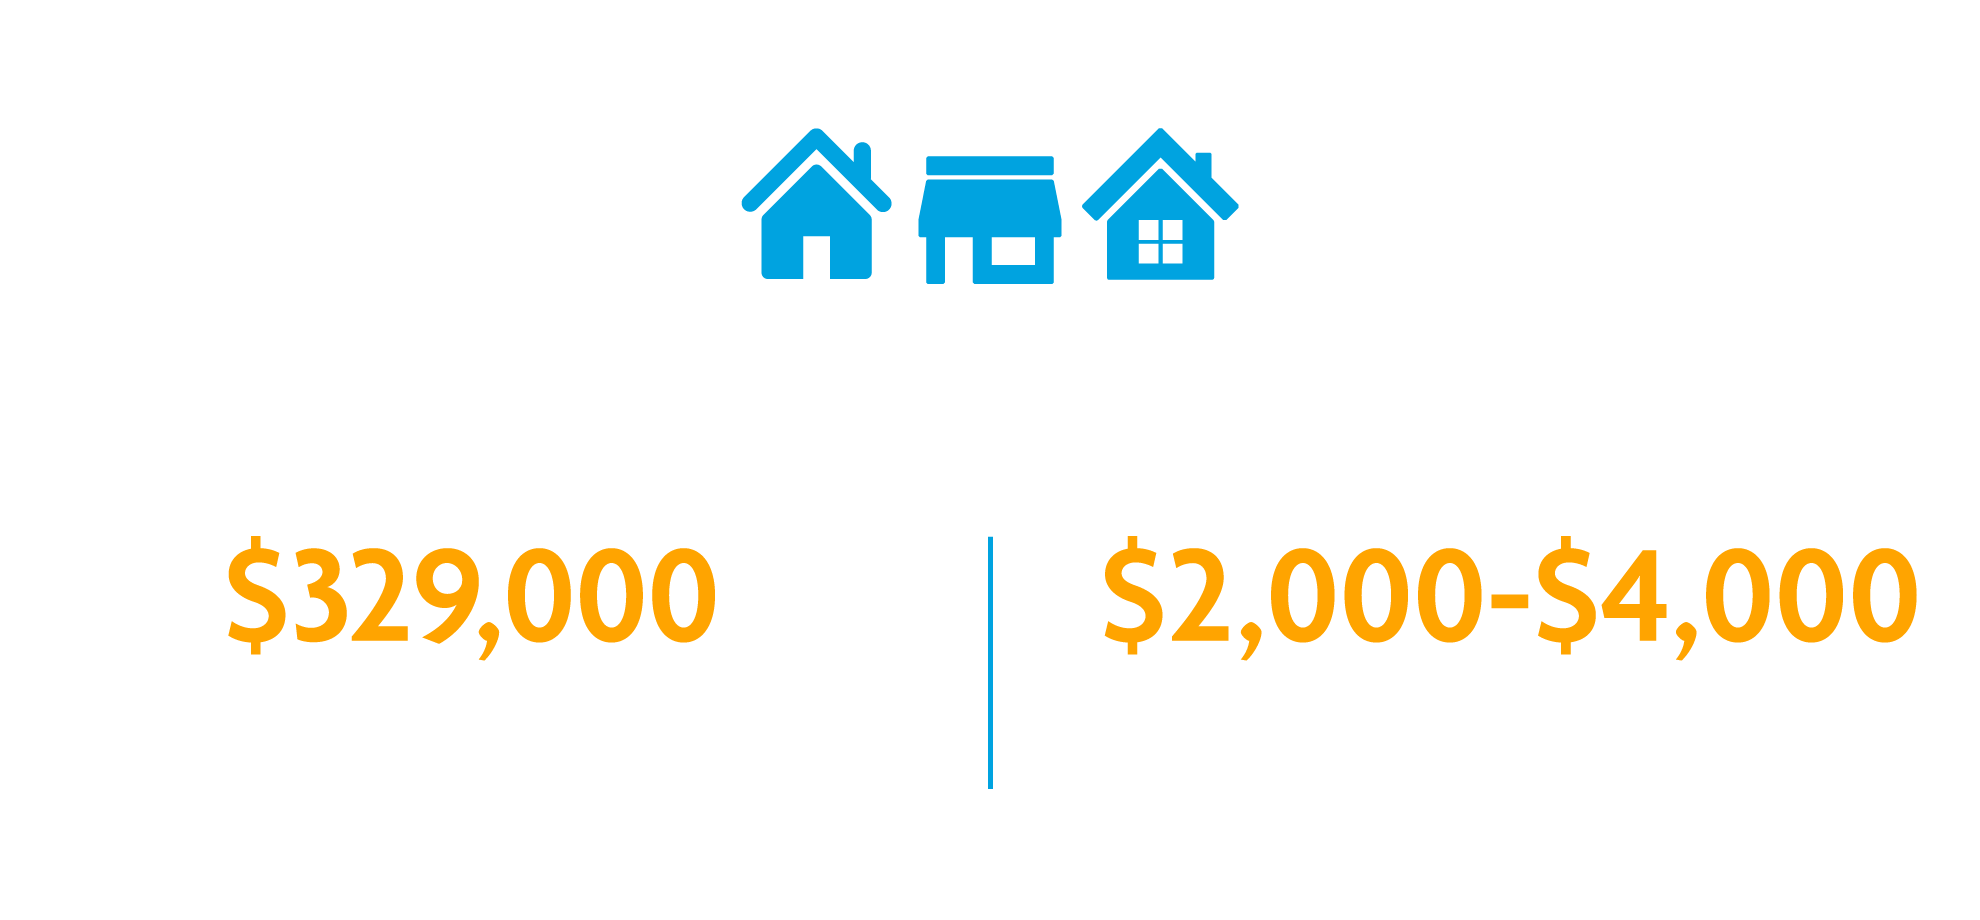 Factor in fees when choosing a CCRC